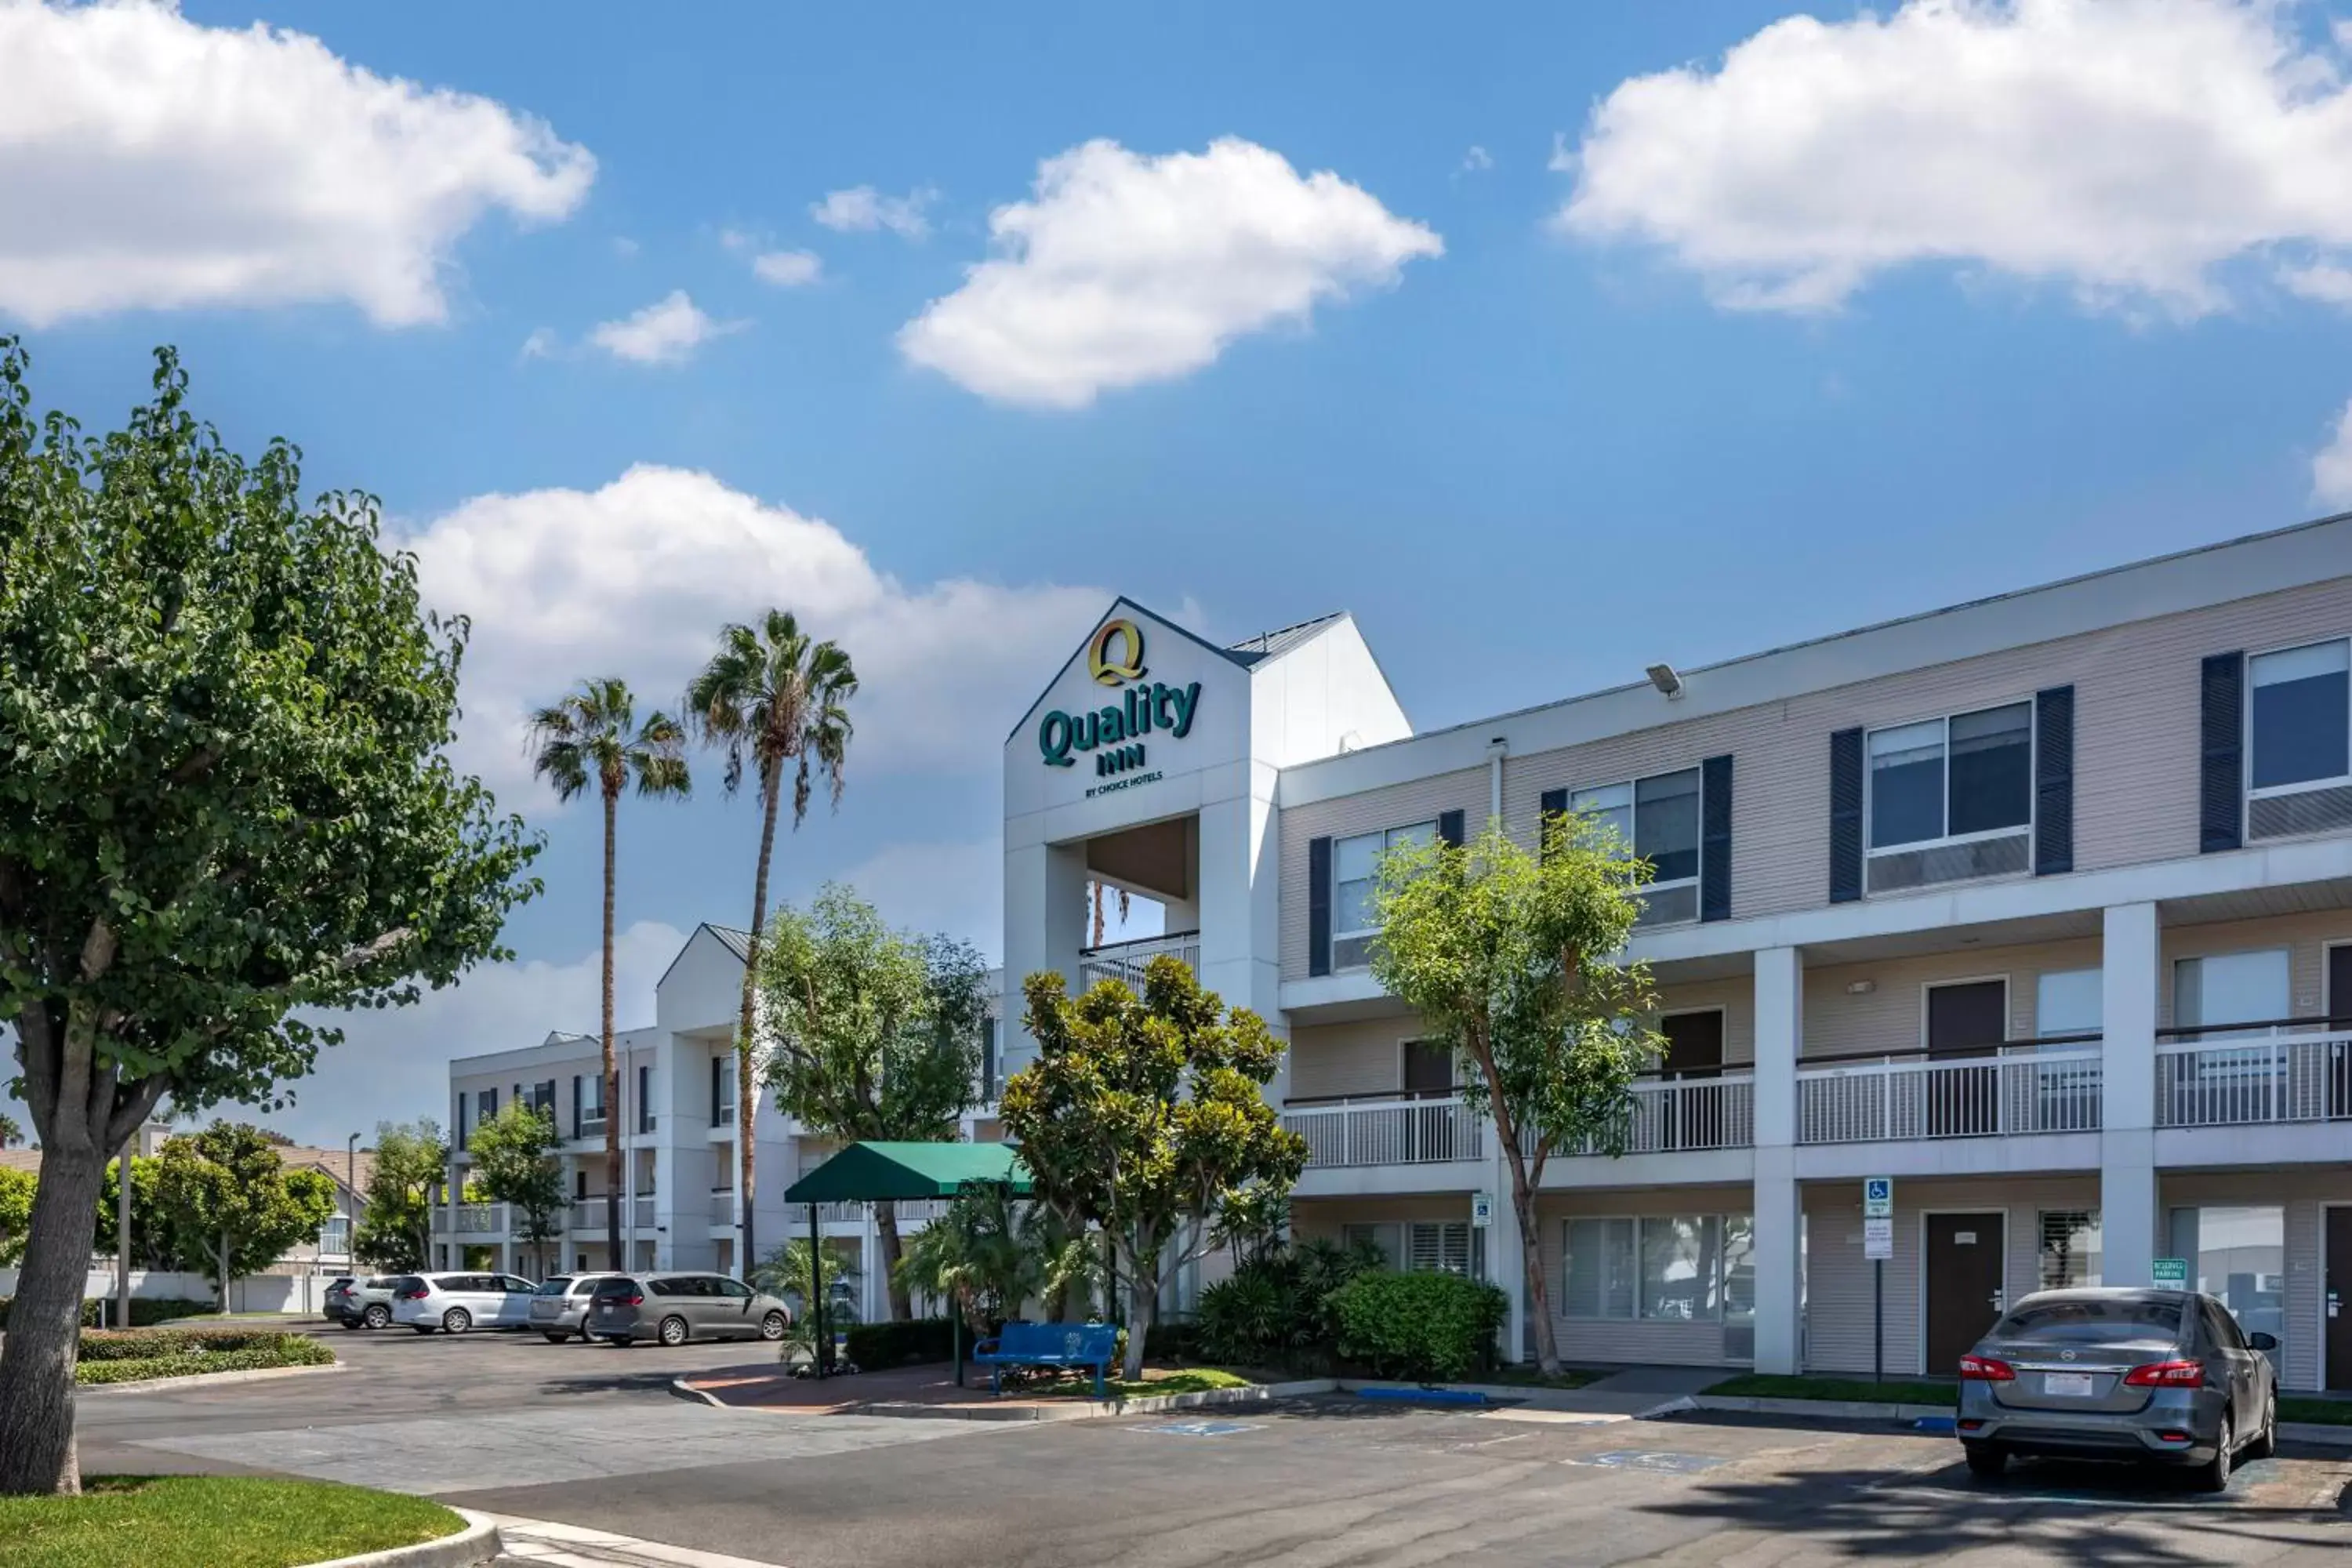 Property Building in Quality Inn Placentia Anaheim Fullerton